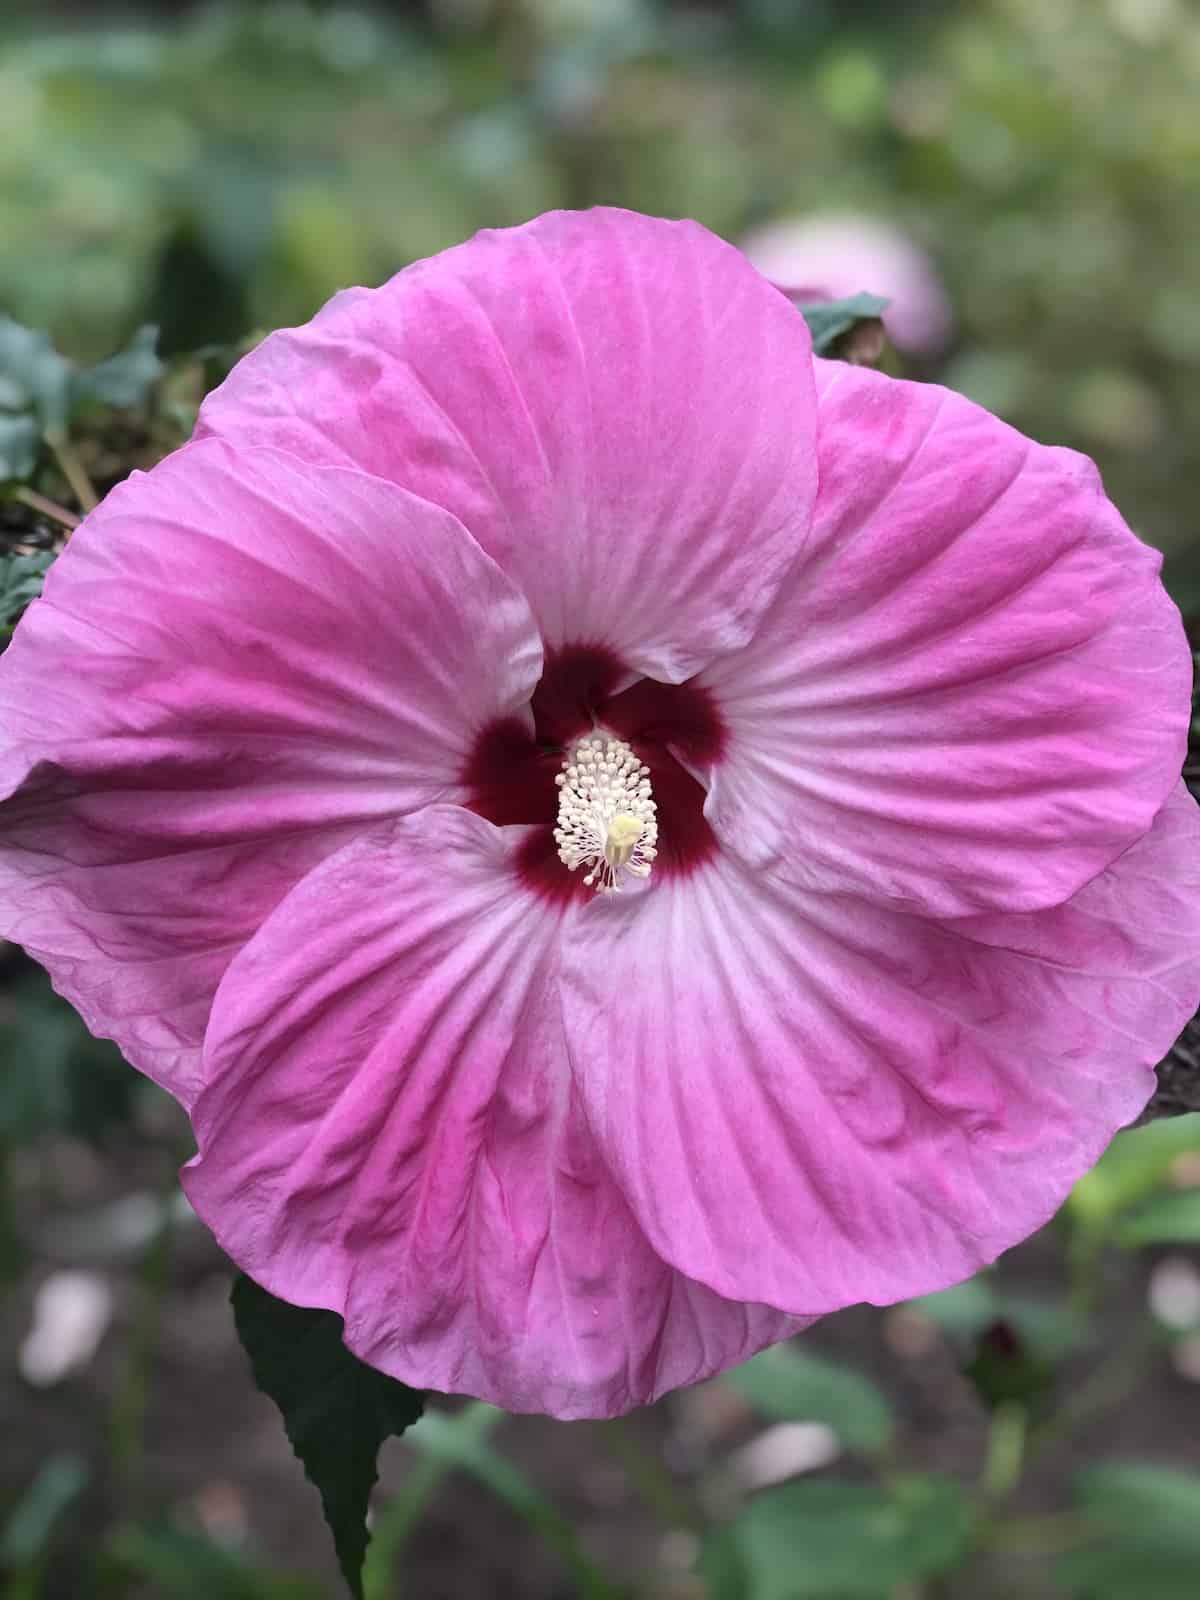 Autumn-blooming giant dinnerplate hardy hibiscus flower